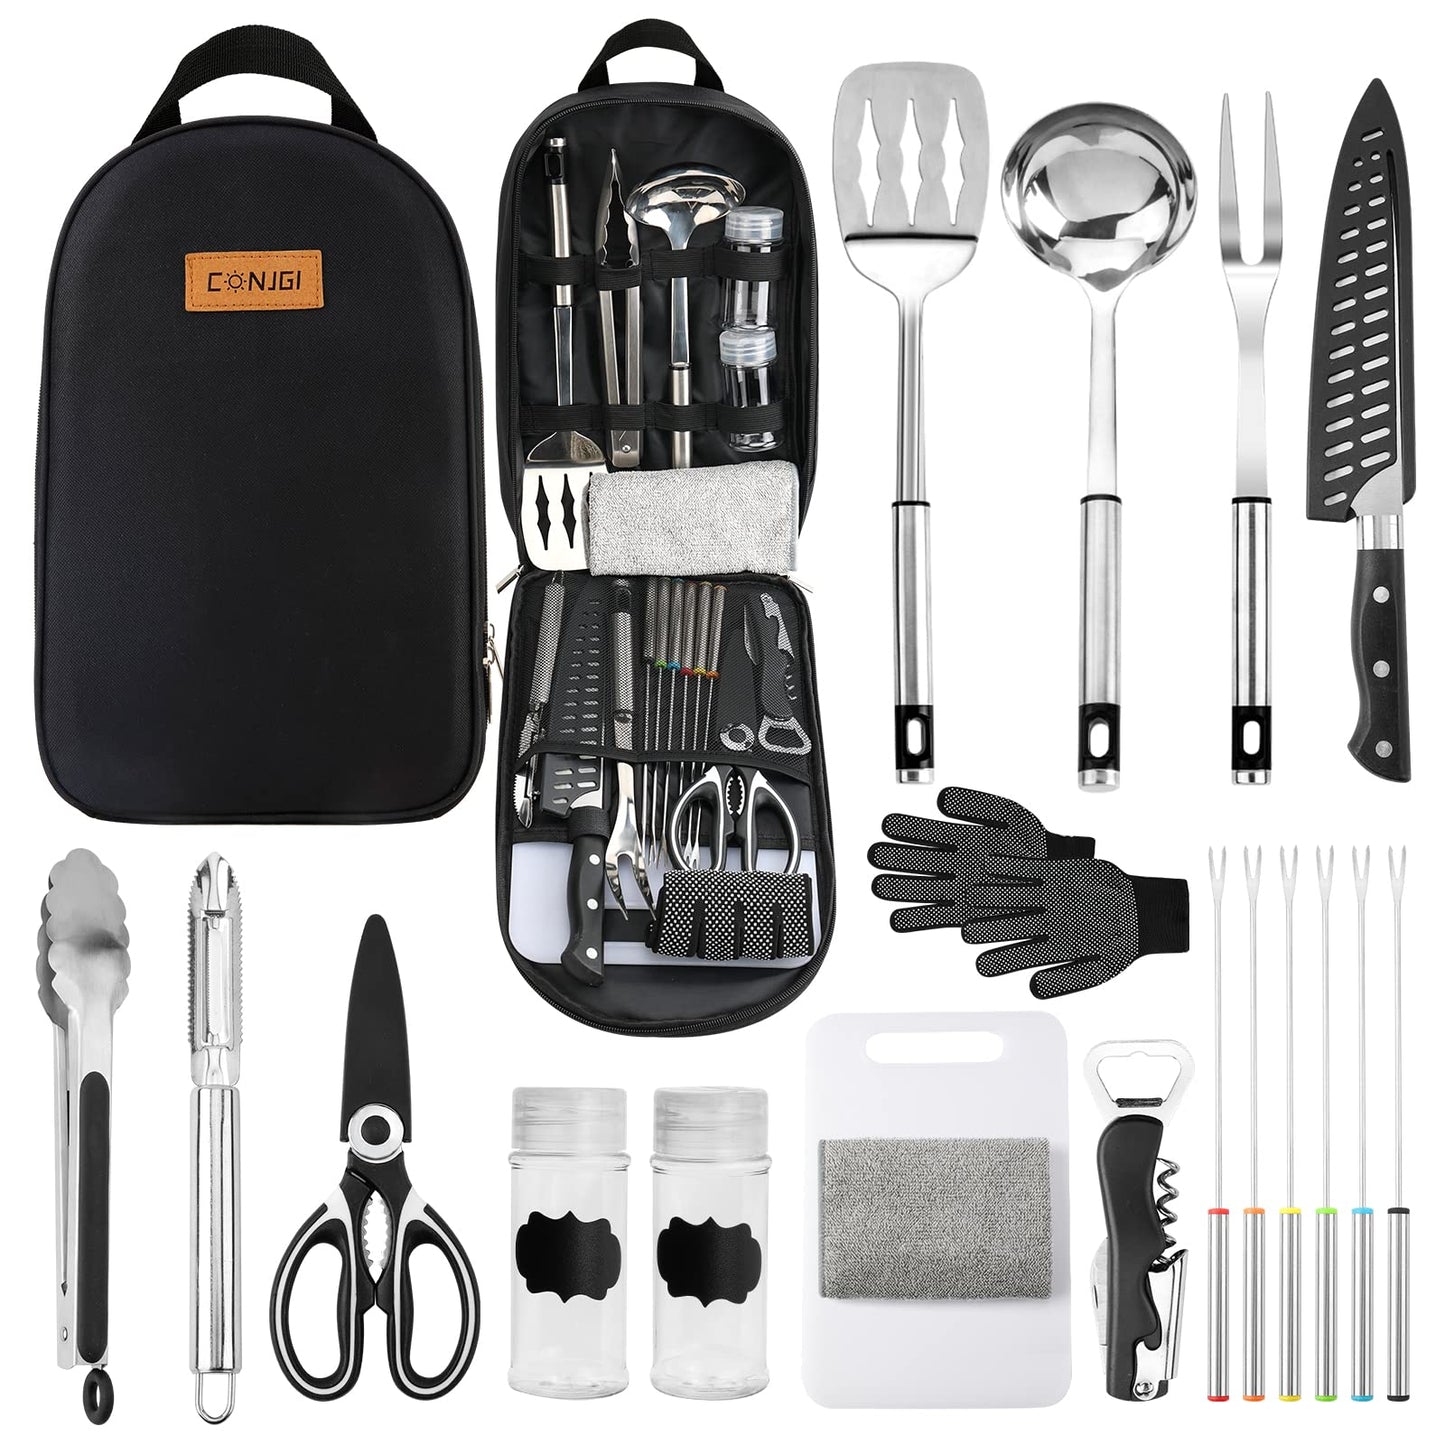 Portable Camping Cooking Utensils Set Bag Suitable for Fork, Spoon, Chopping Board, Chef's Knife,Kitchenware Storage